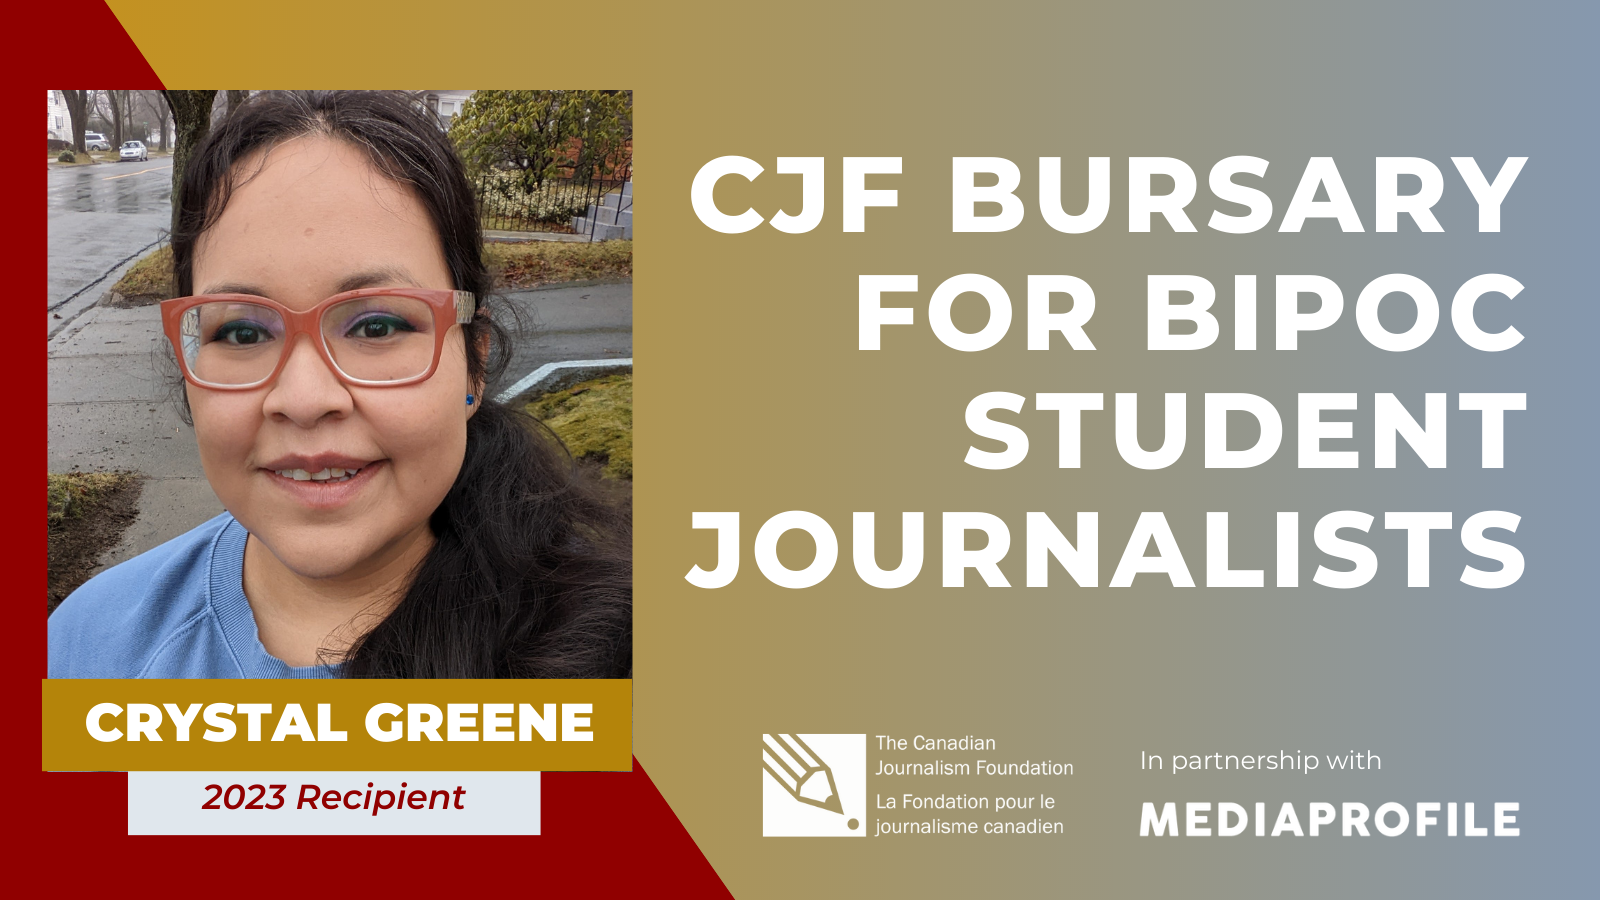 CJF Bursary for BIPOC Student Journalists. Crystal Greene 2023 Recipient. Canadian Journalism Foundation in partnership with MediaProfile.